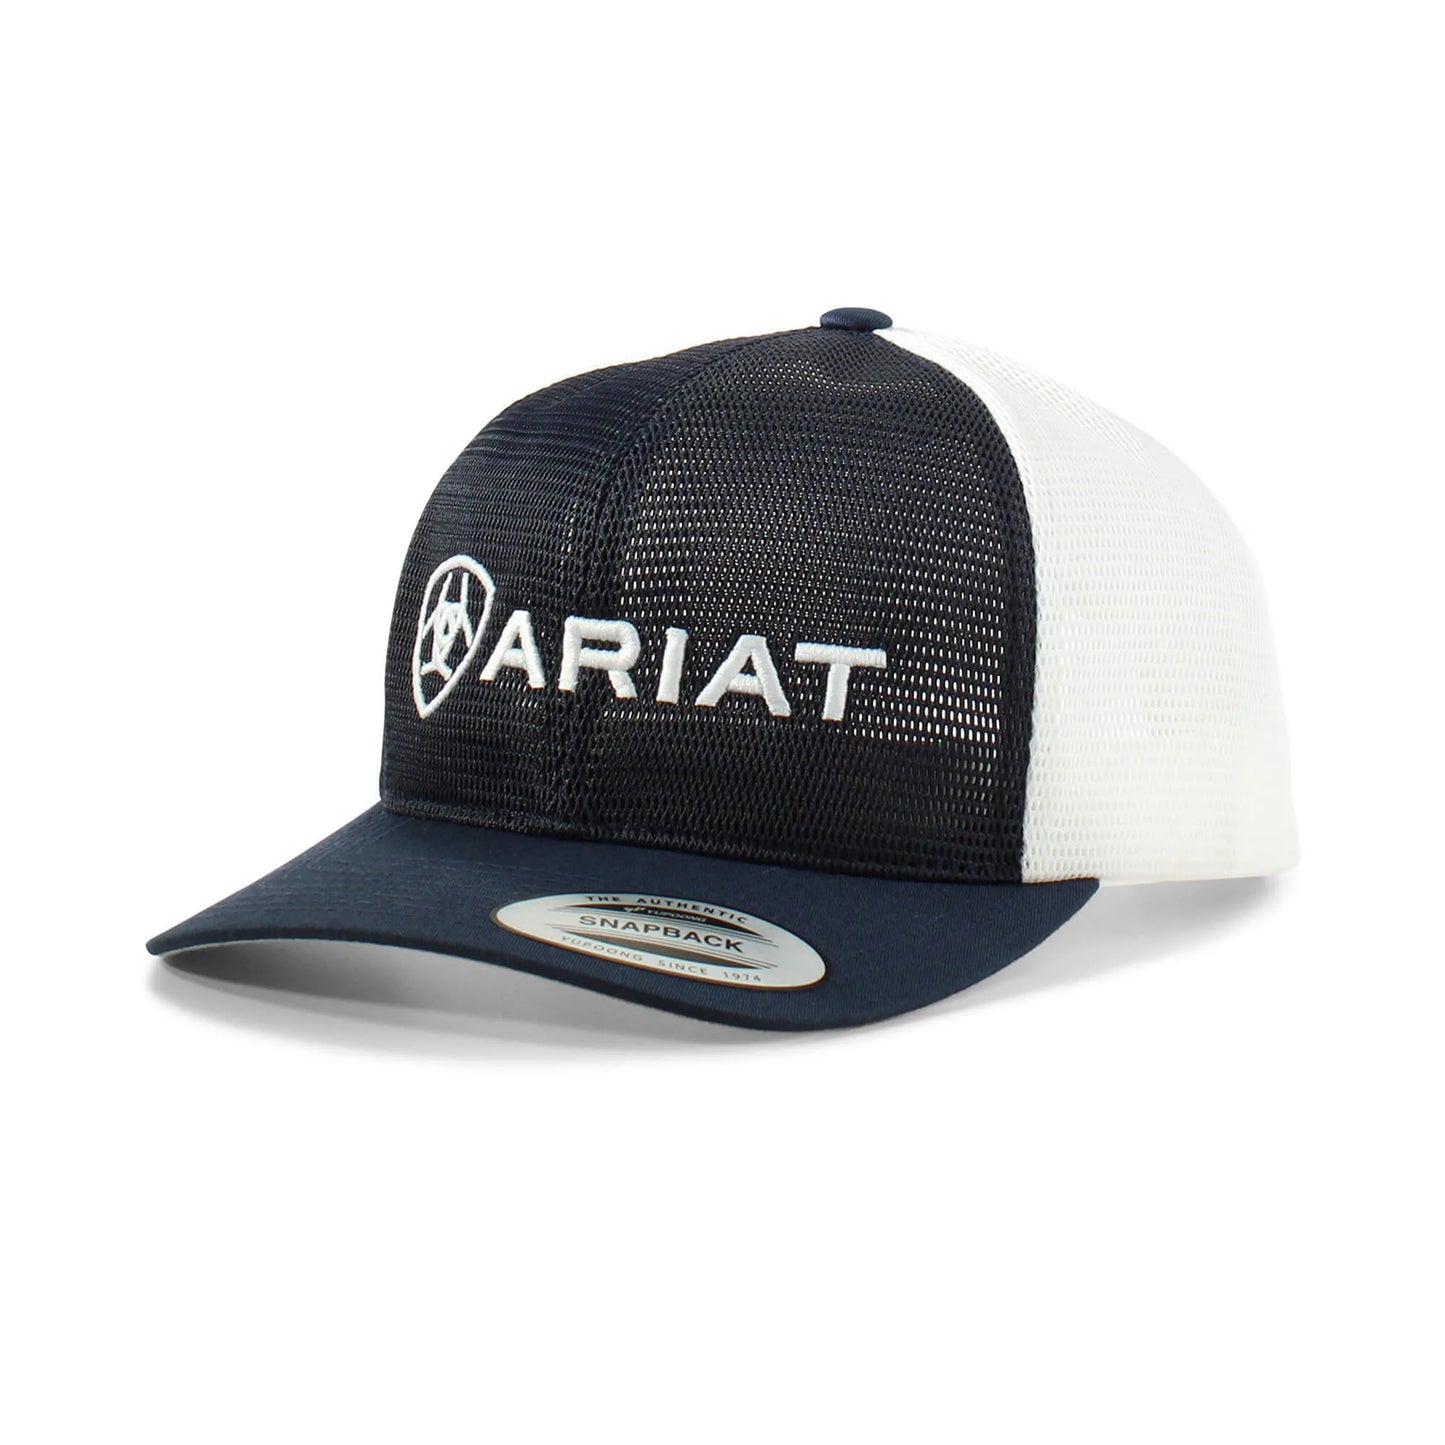 Ariat Embroidered Logo Navy and White Snapback Cap Hat